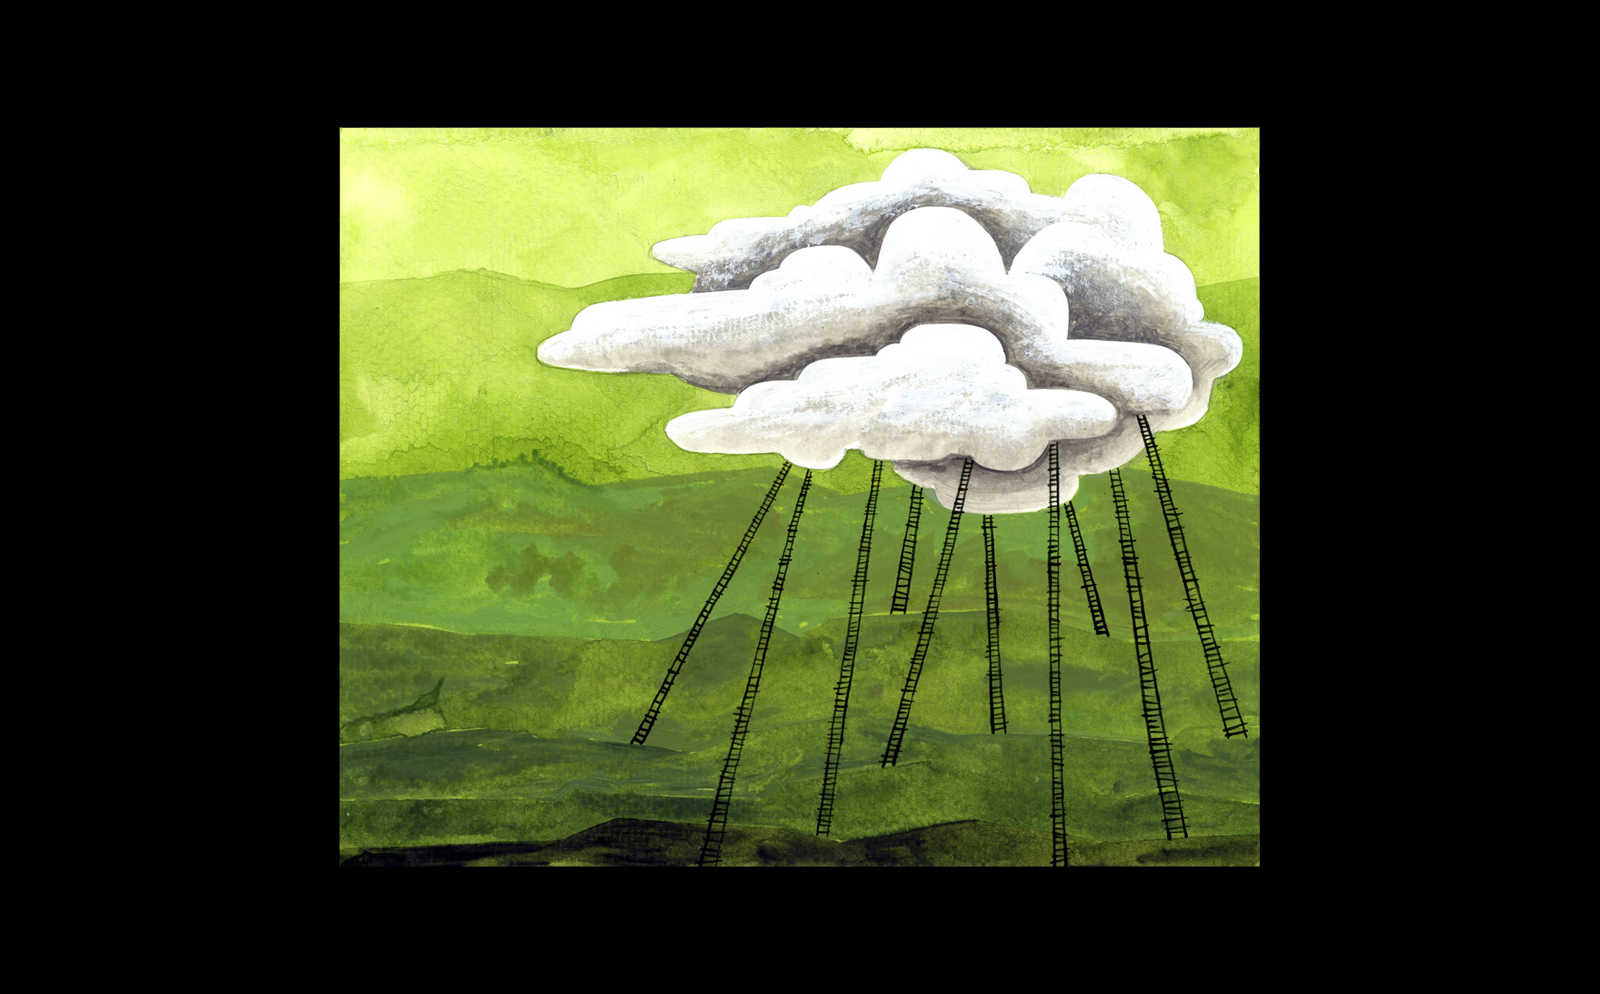 An illustration of clouds with ladders reaching down to the ground